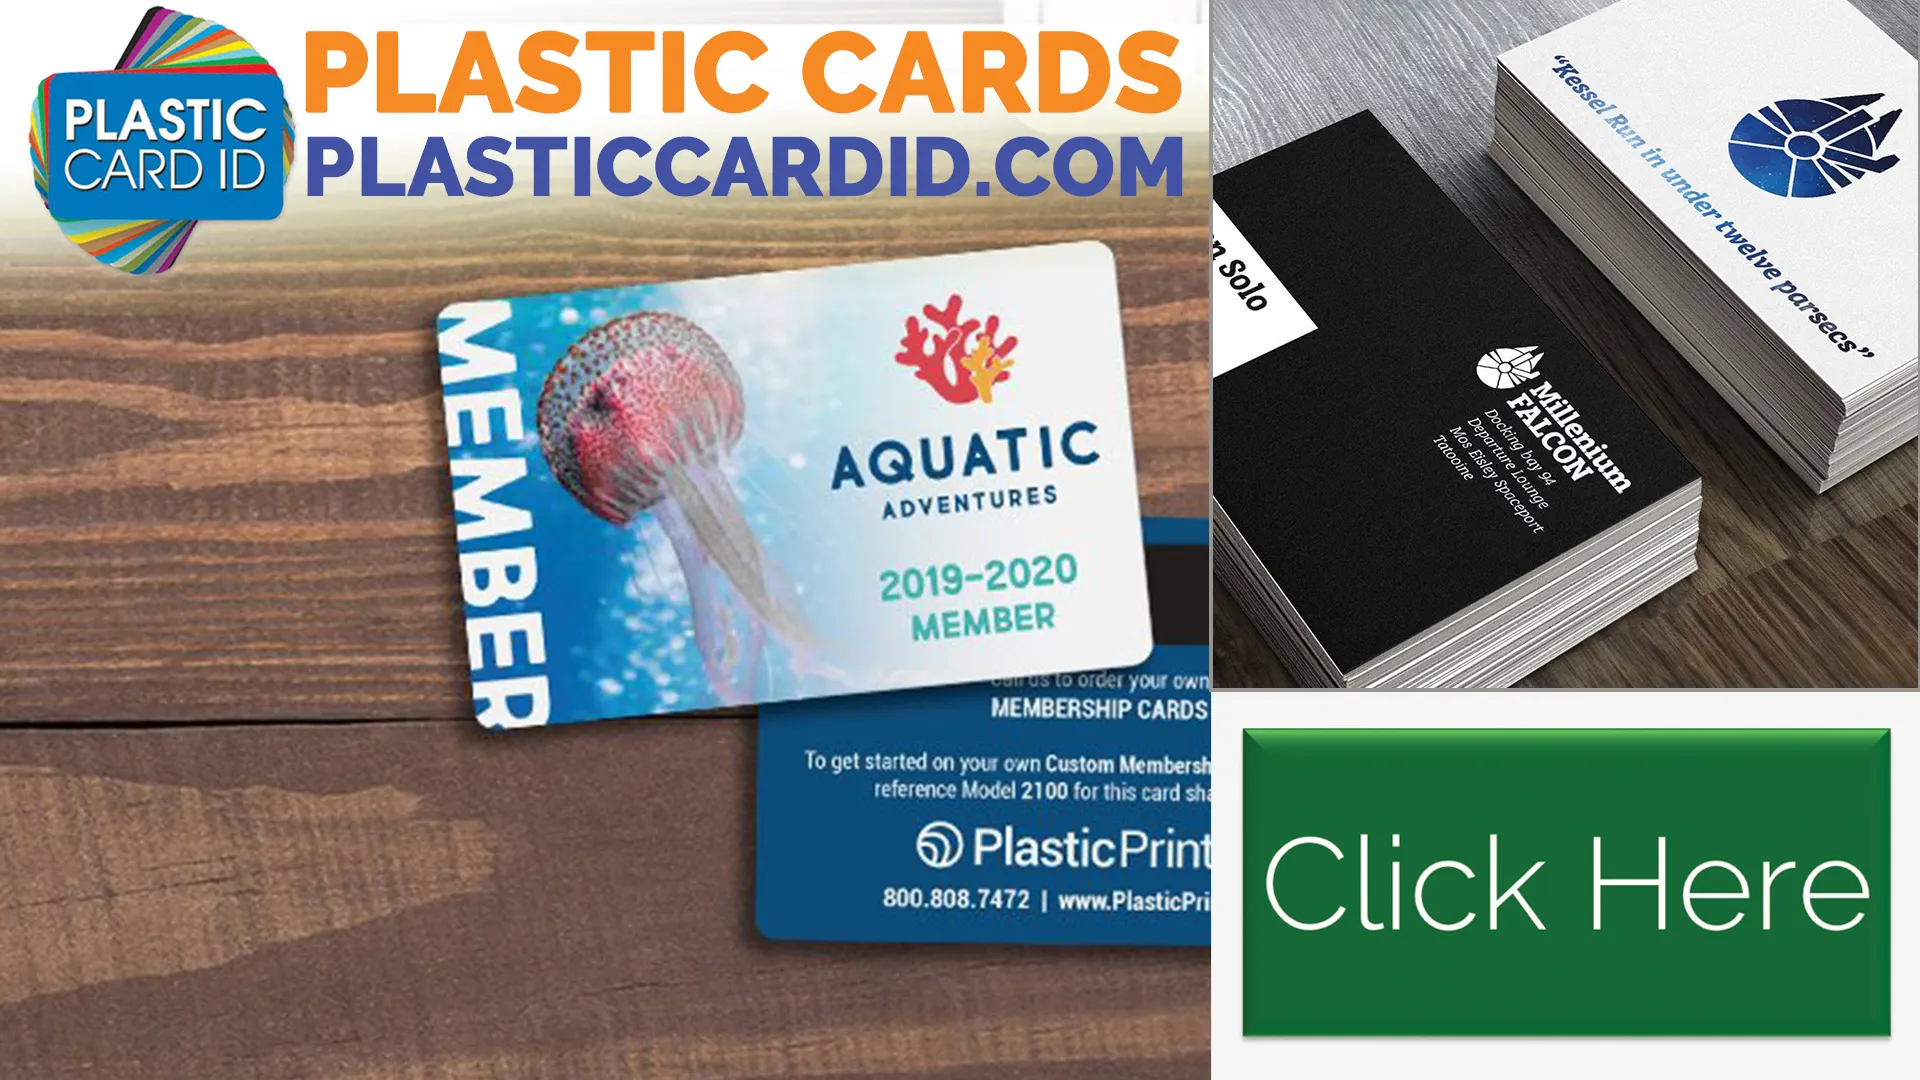 Embrace the Wide Array of Plastic Card Uses